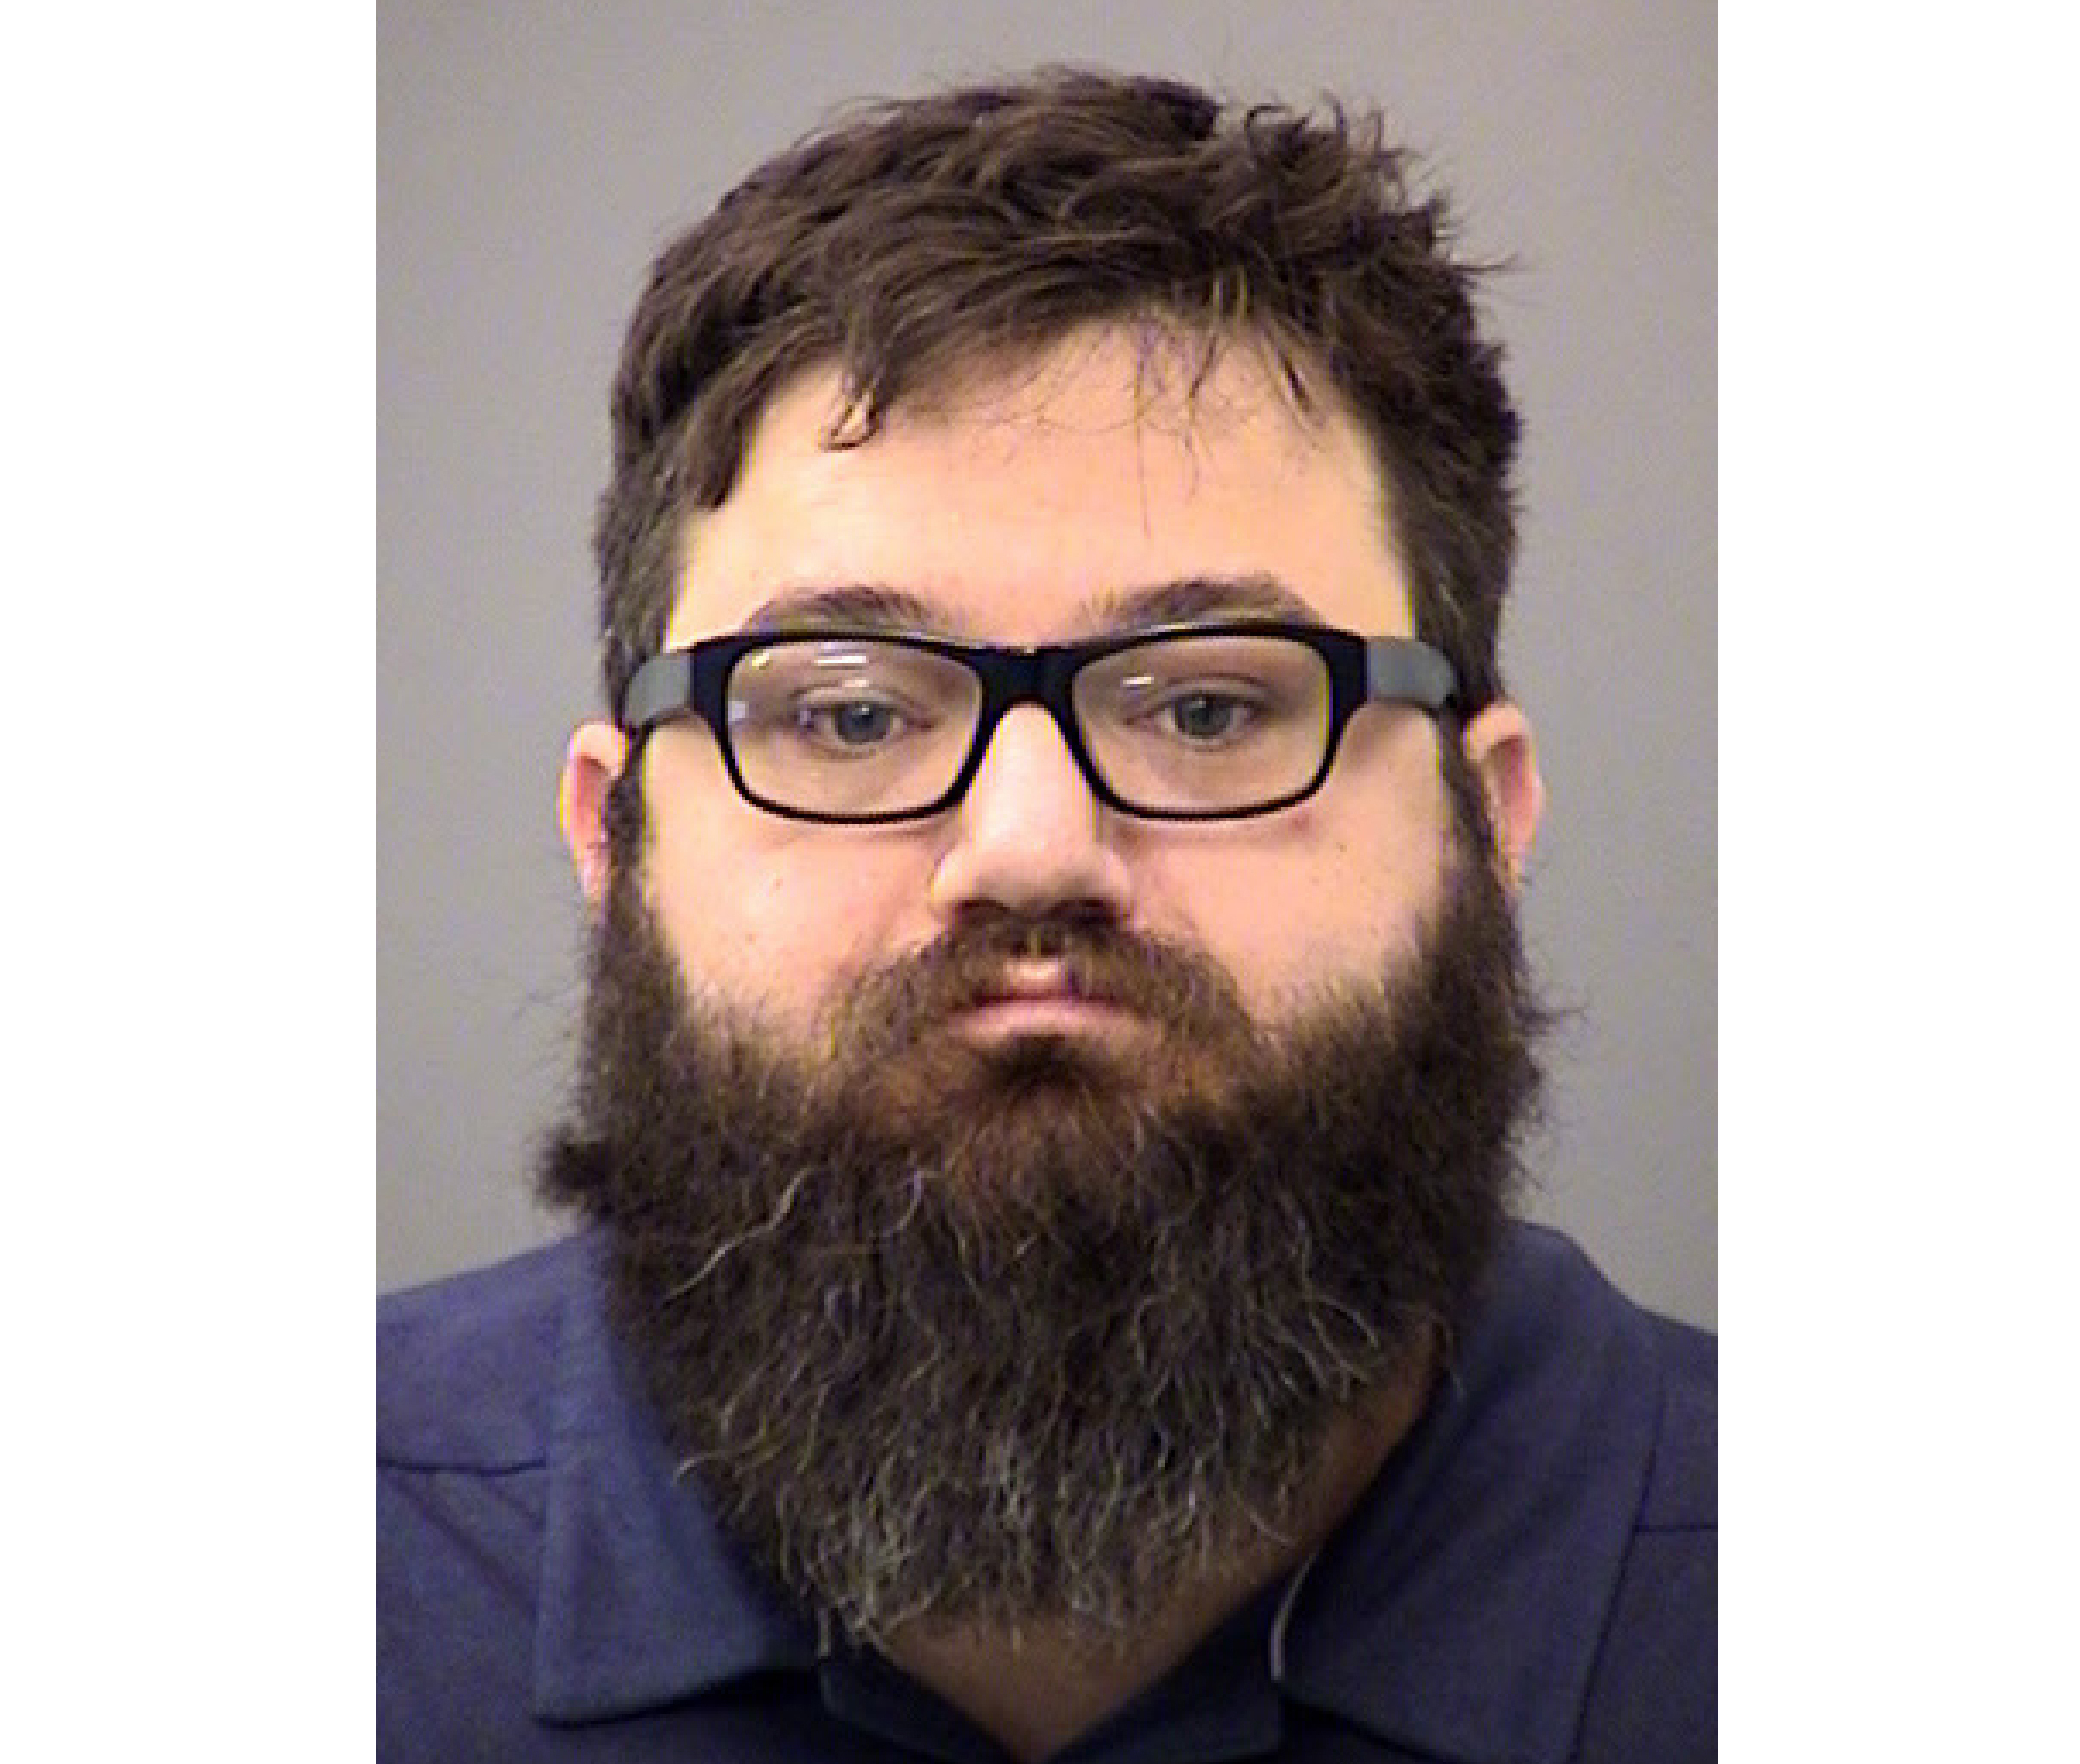 FILE - This booking photo provided by the Indianapolis Metropolitan Police Department shows Dustin ...